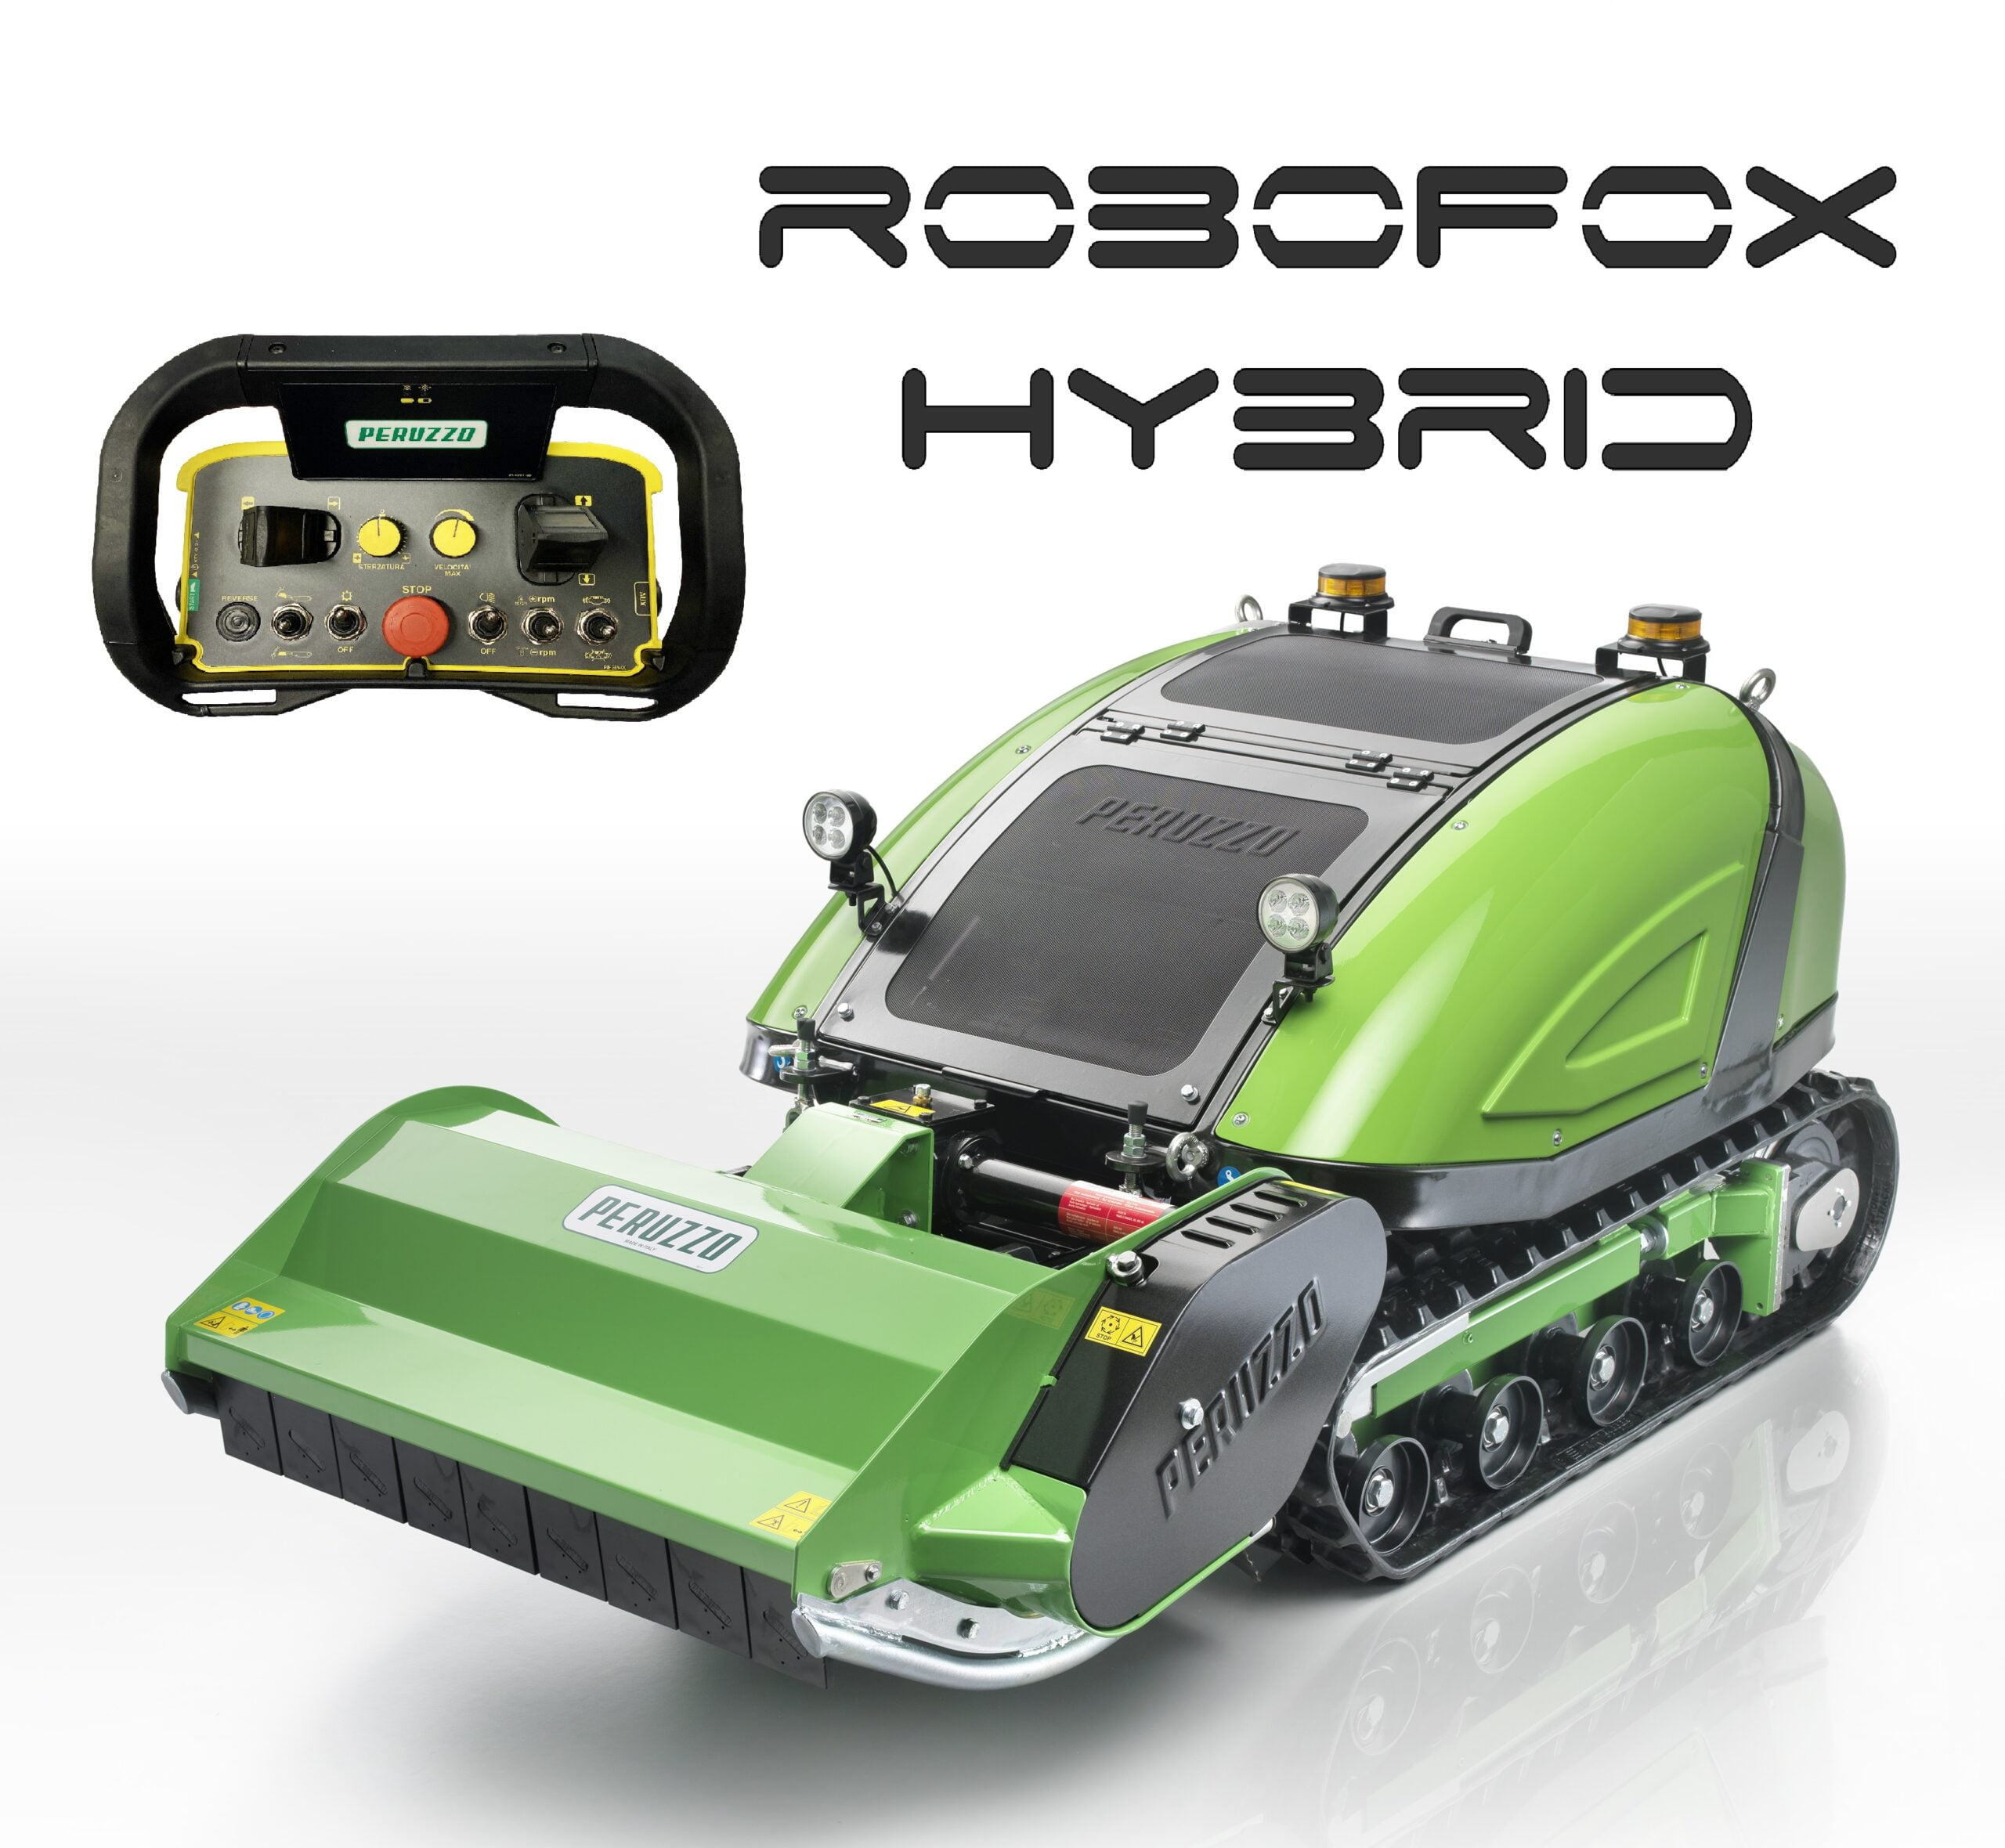 Self-propelled remote-controlled flail mower ROBOFOX HYBRID